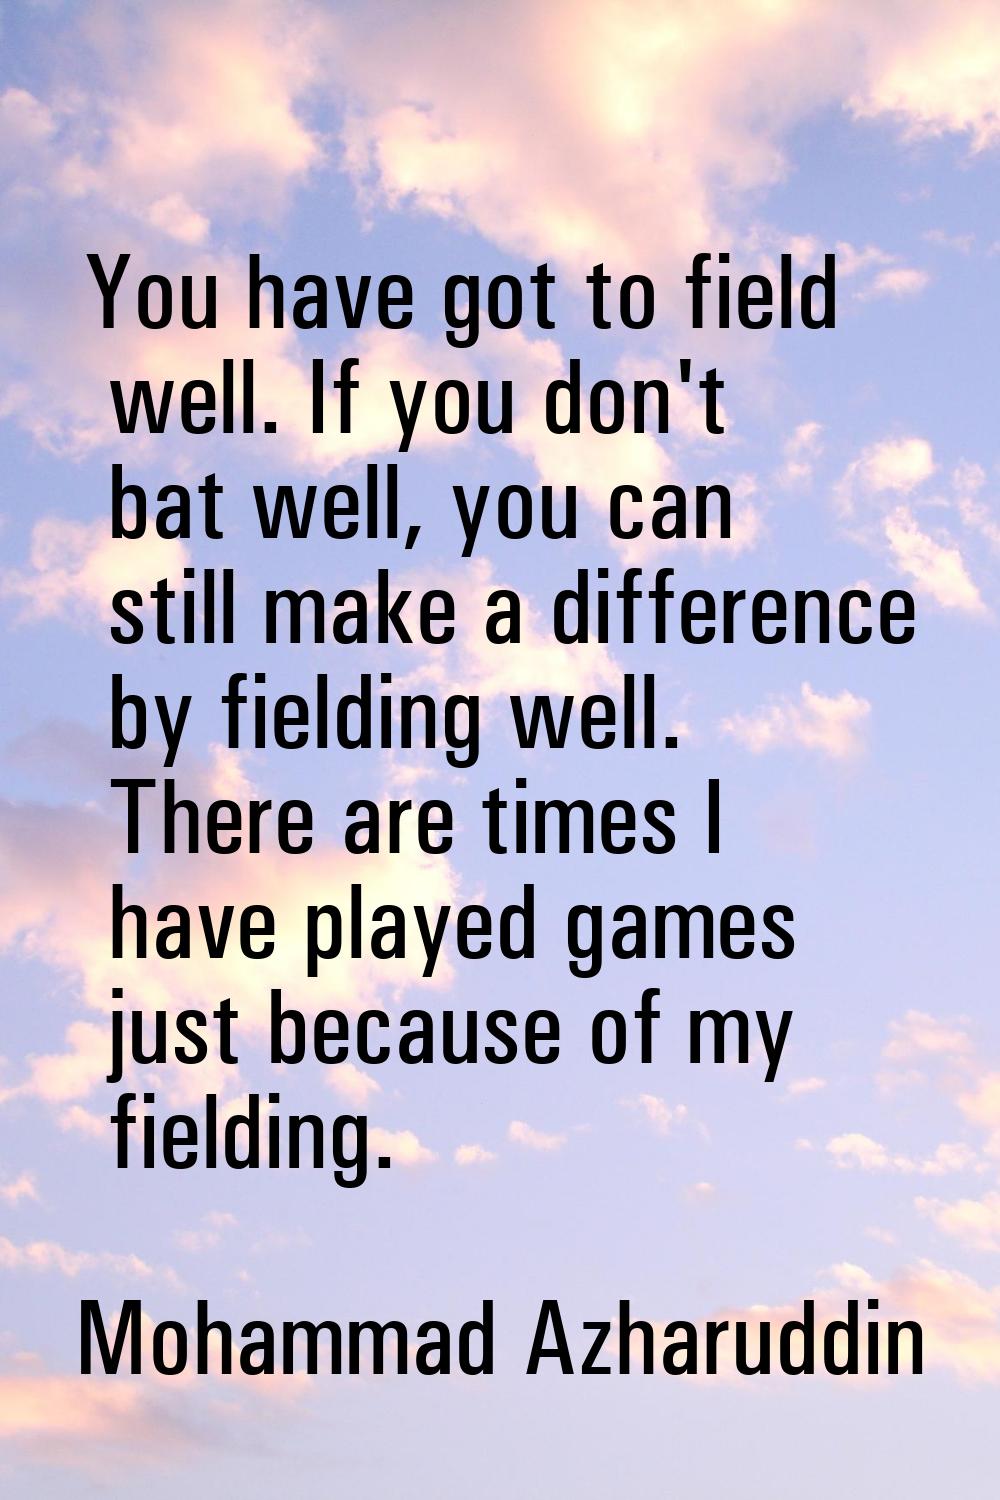 You have got to field well. If you don't bat well, you can still make a difference by fielding well